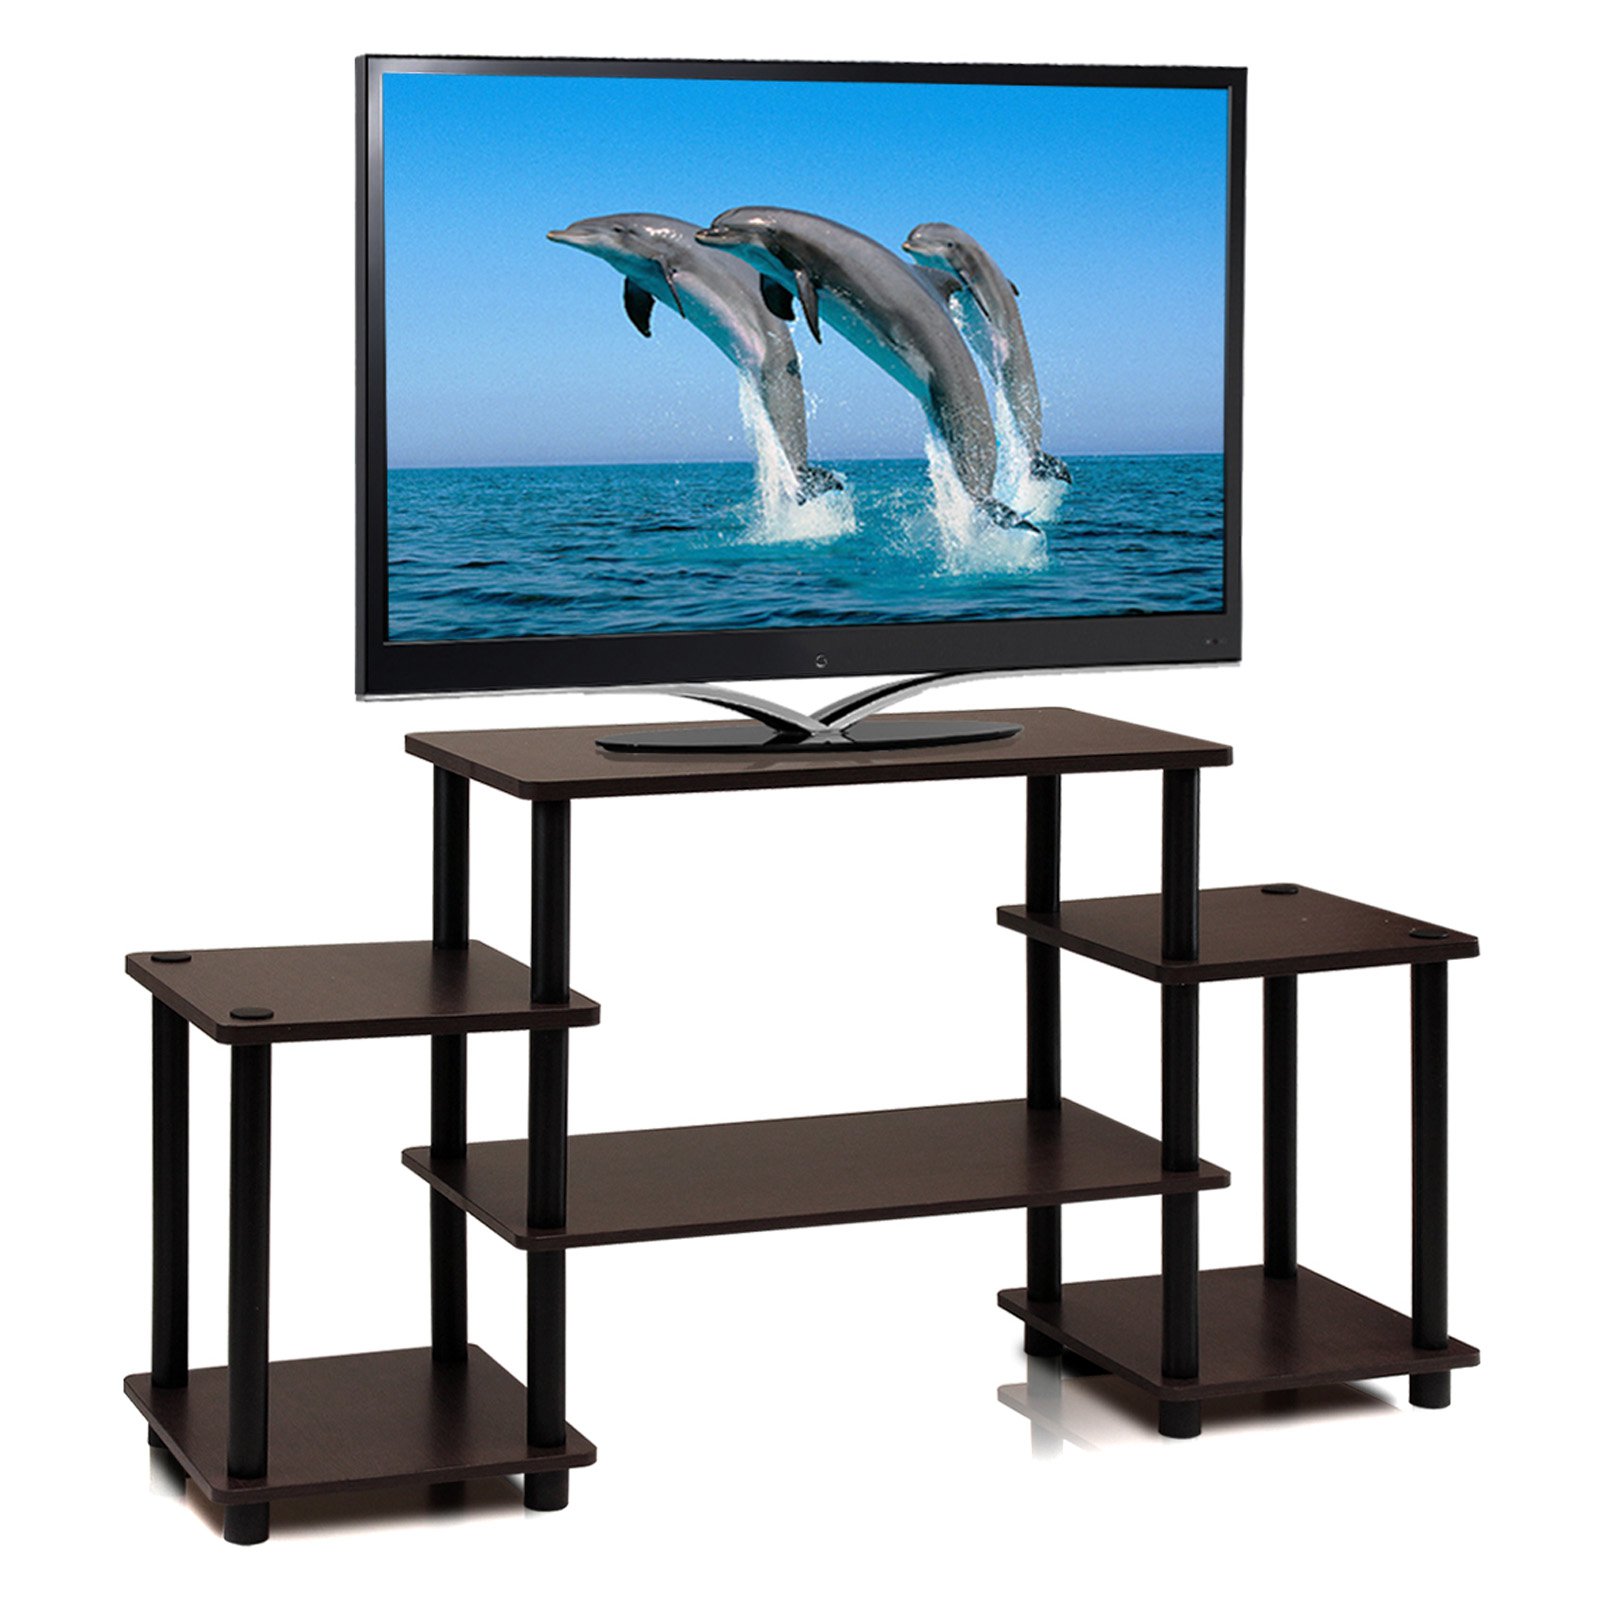 Furinno 11257 Turn-N-Tube TV Stand for up to 25 TV - image 3 of 5